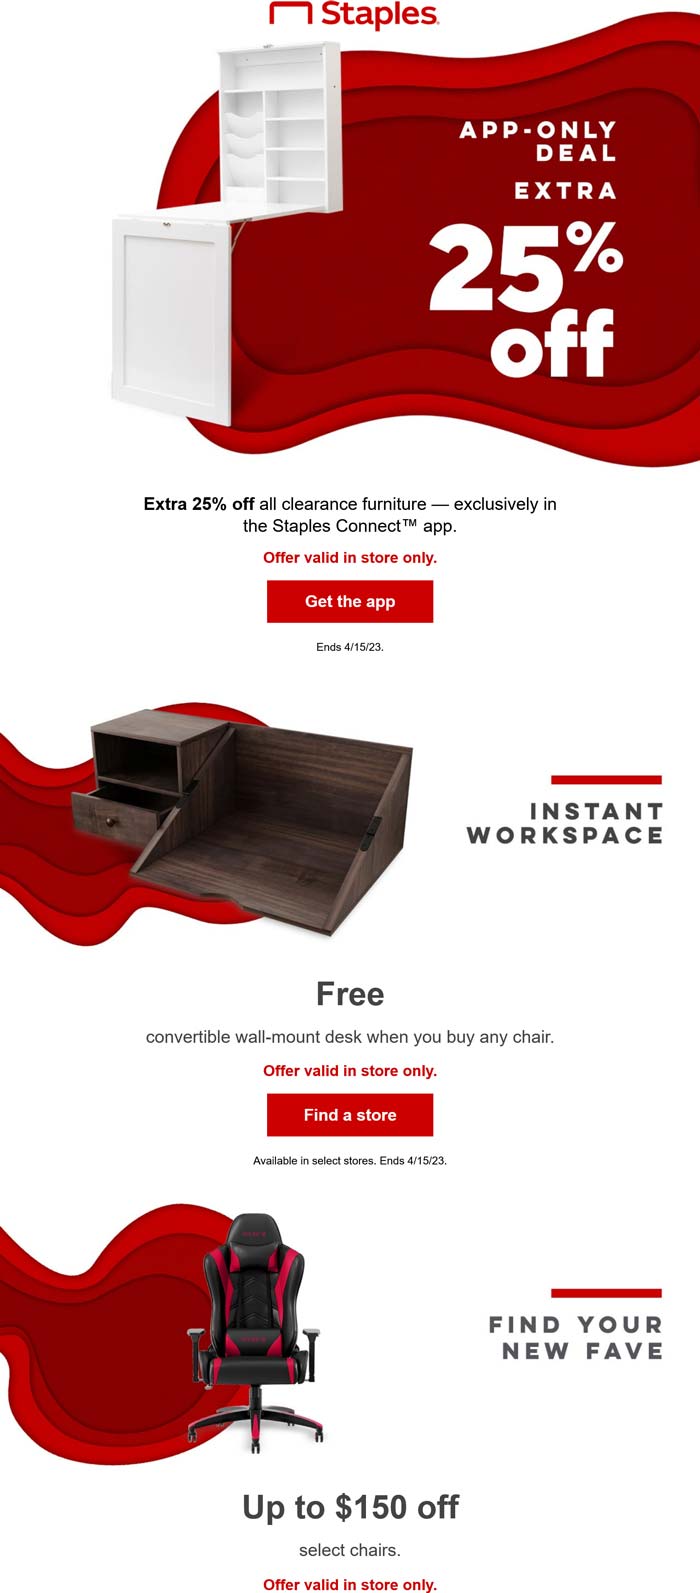 Staples stores Coupon  Extra 25% off all clearance furniture at Staples #staples 